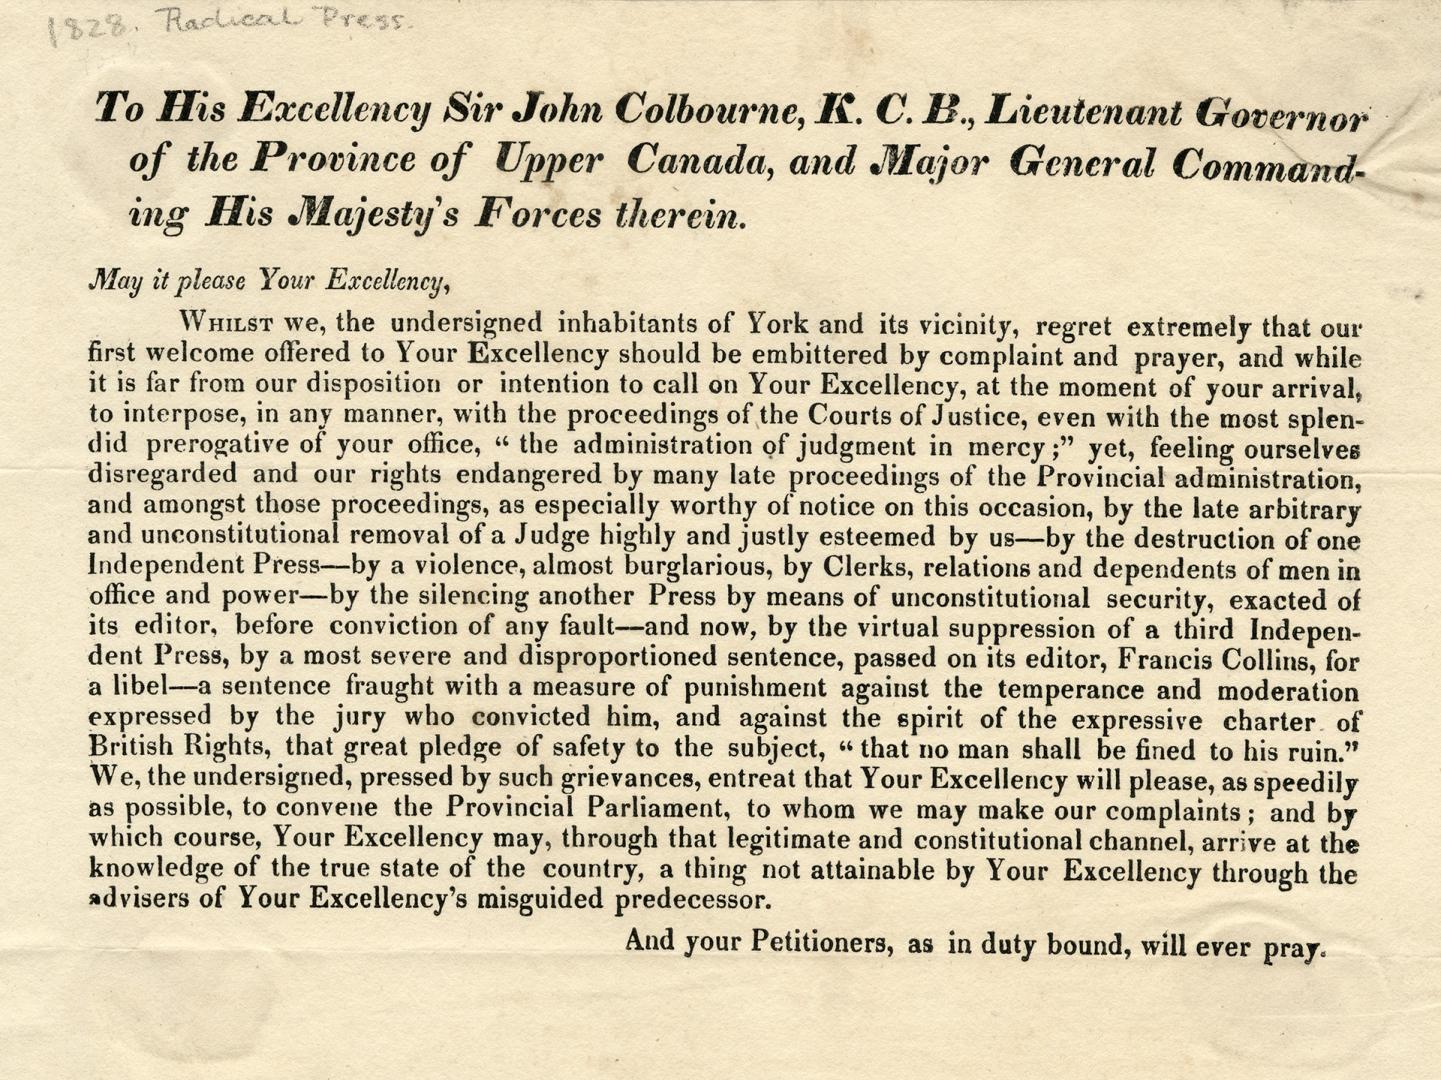 To His Excellency, Sir John Colbourne [sic], K